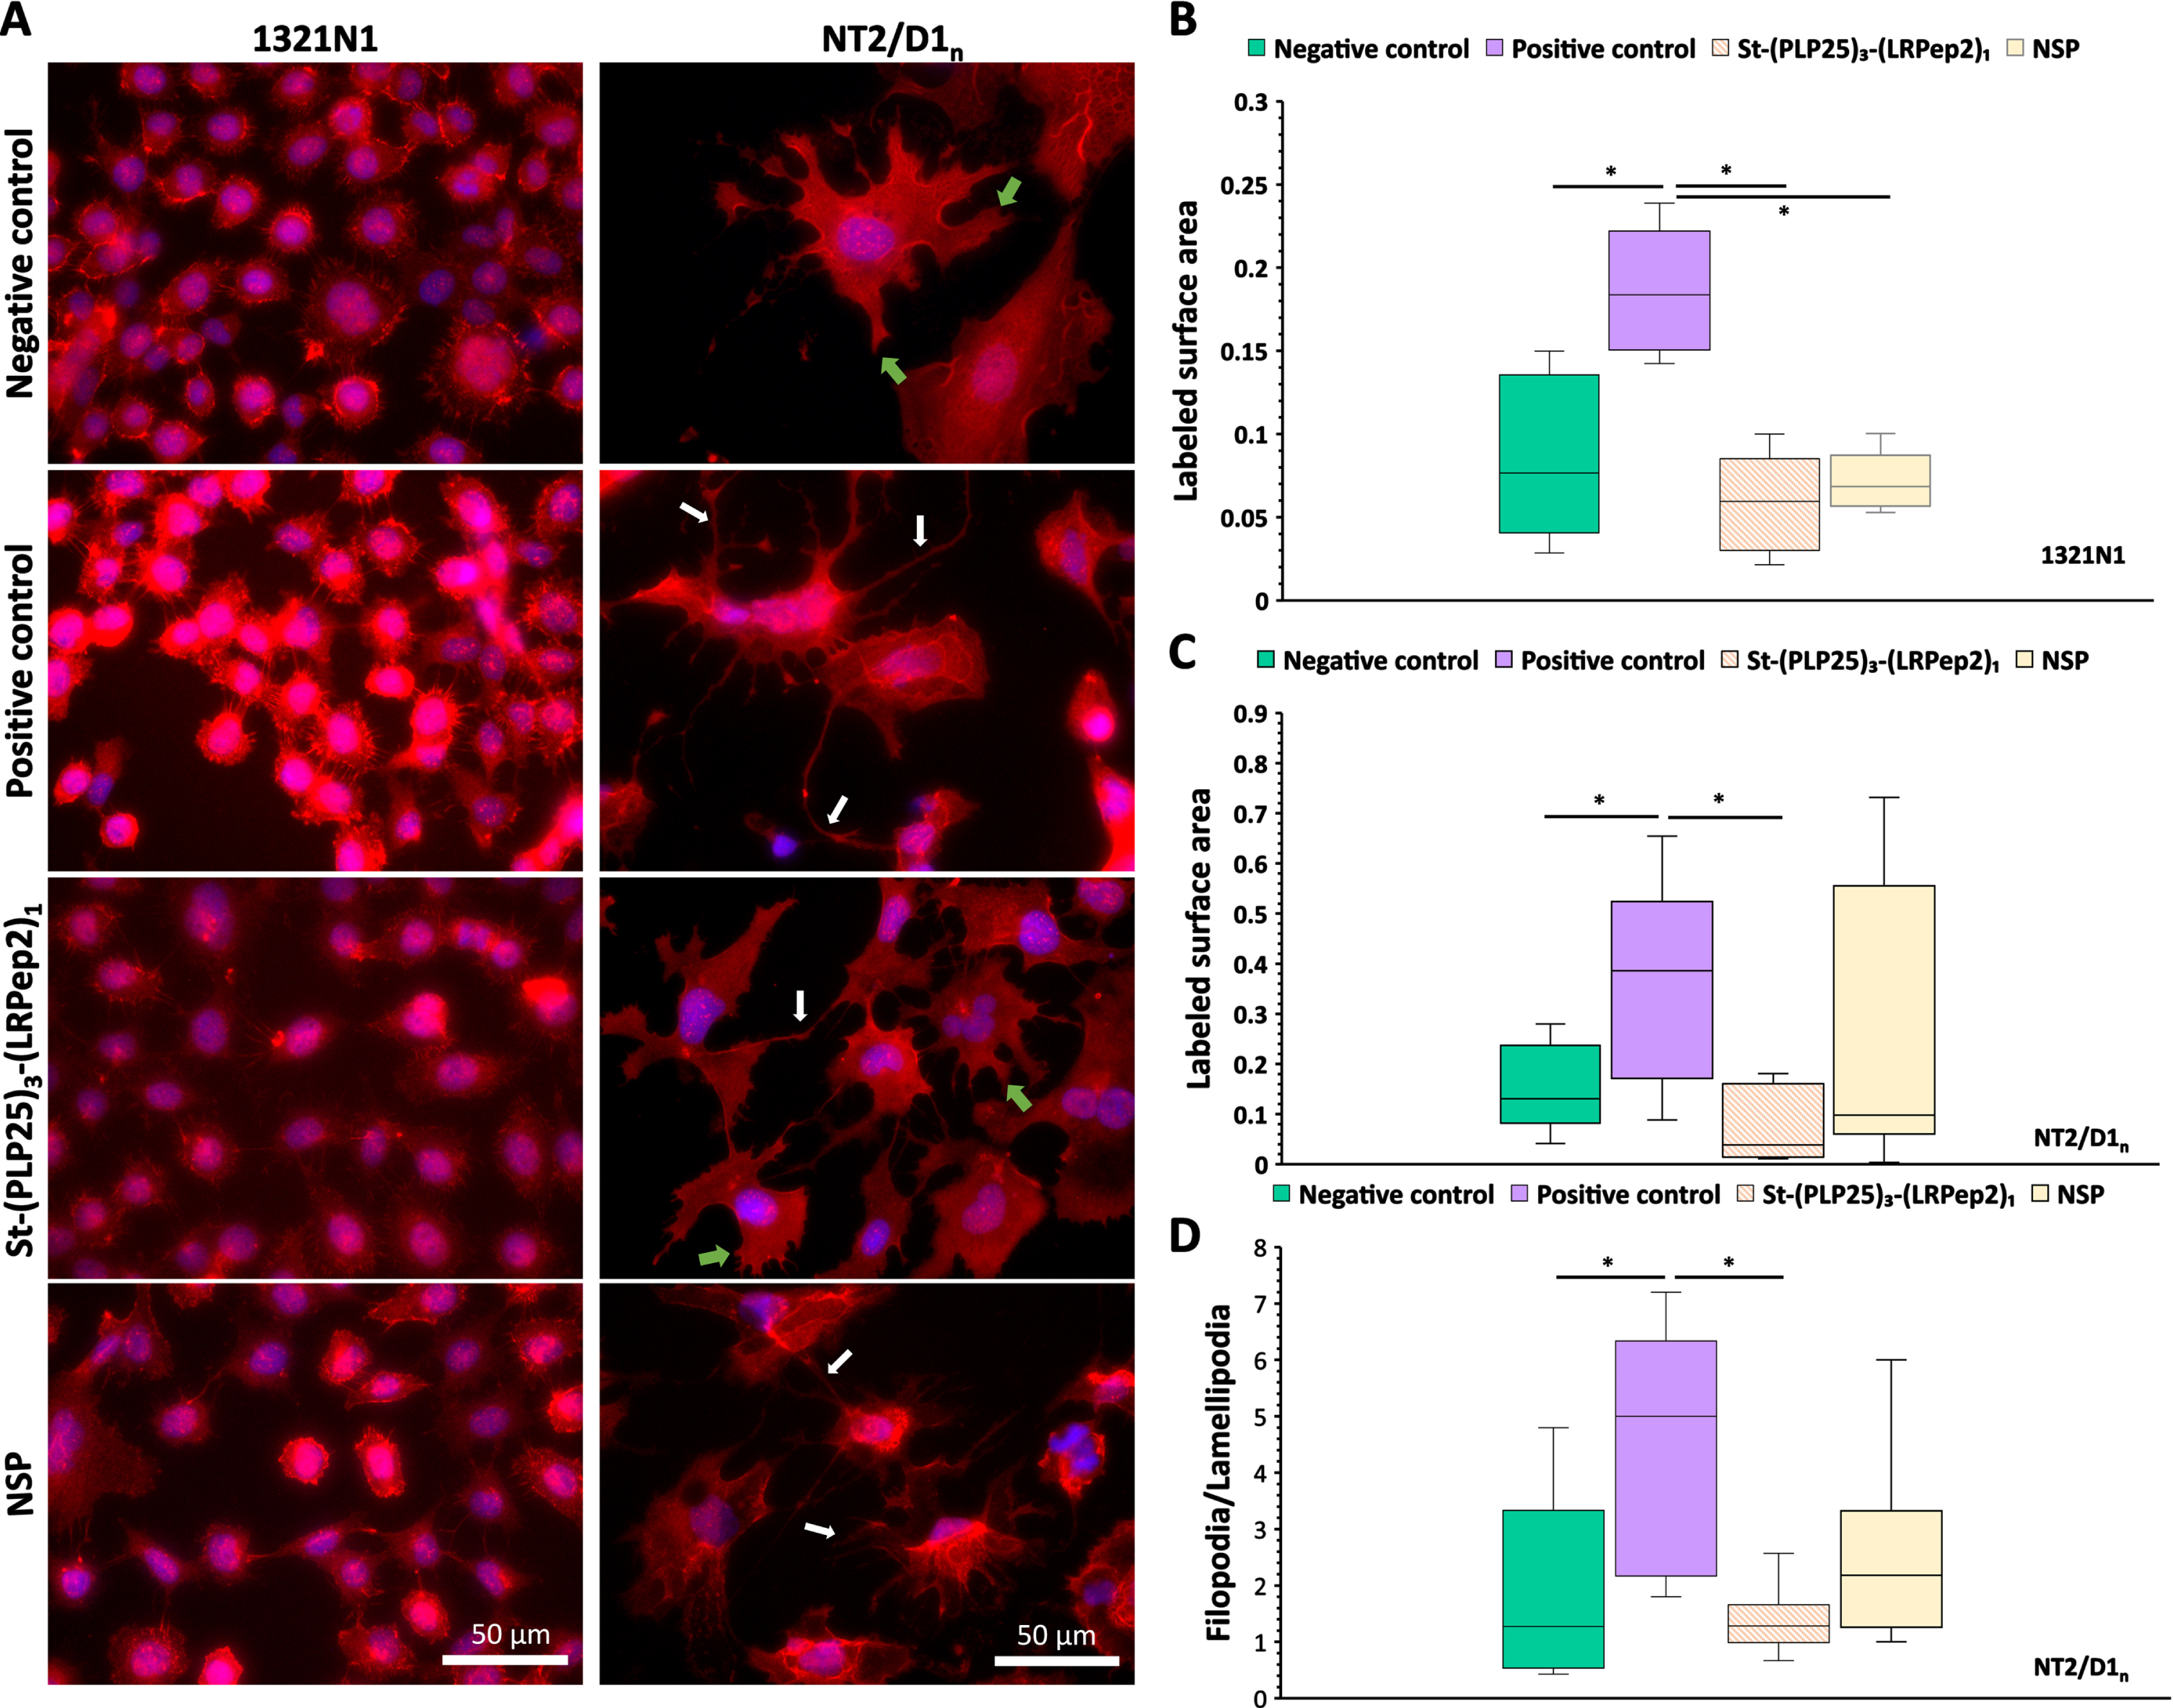 A) IF detection of the cPLA2-IVA in 1321N1 and NT2/D1n cells. cPLA2-IVA appears in red thanks to the Dylight594, nuclei in blue by the DAPI. White arrows highlight filopodia processes, green arrows lamellipodia. B, C) Total area stained by the cPLA2-IVA in the cell processes of 1321N1 (B) and NT2/D1n (C), measured by the ImageJ software after threshold determination allowing the isolation of processes from the cell body. D) Filopodia/lamellipodia ratio stained by the cPLA2-IVA in NT2/D1n cells. Negative control corresponds to non-stimulated and non-inhibited cells, positive control to cPLA2-IVA-stimulated cells (H2O2 in 1321N1, glutamate in NT2/D1n). * p < 0.05 (Mann-Whitney).